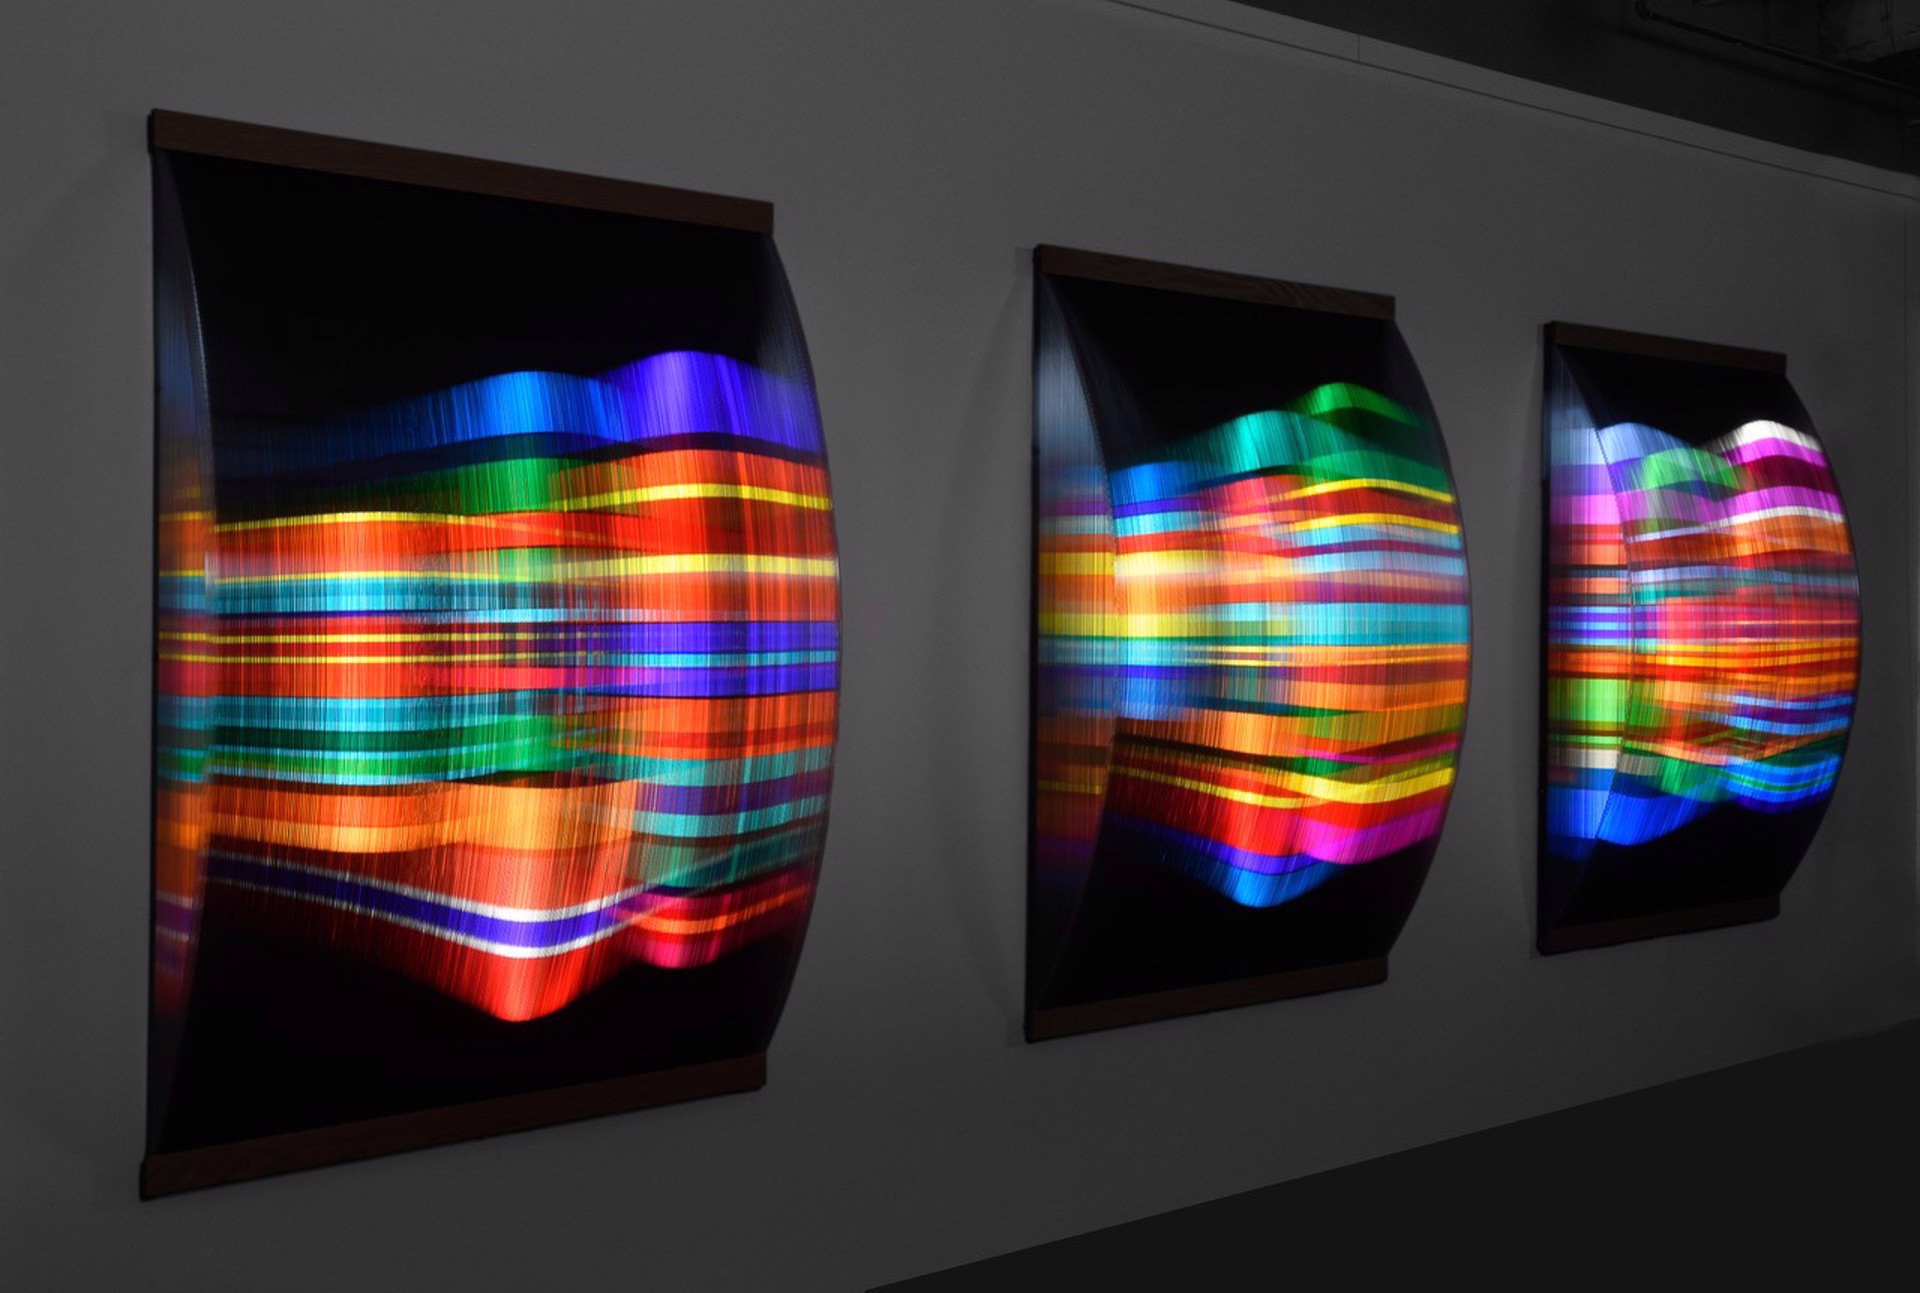 Diffraction Panel #3 by Martin Cail